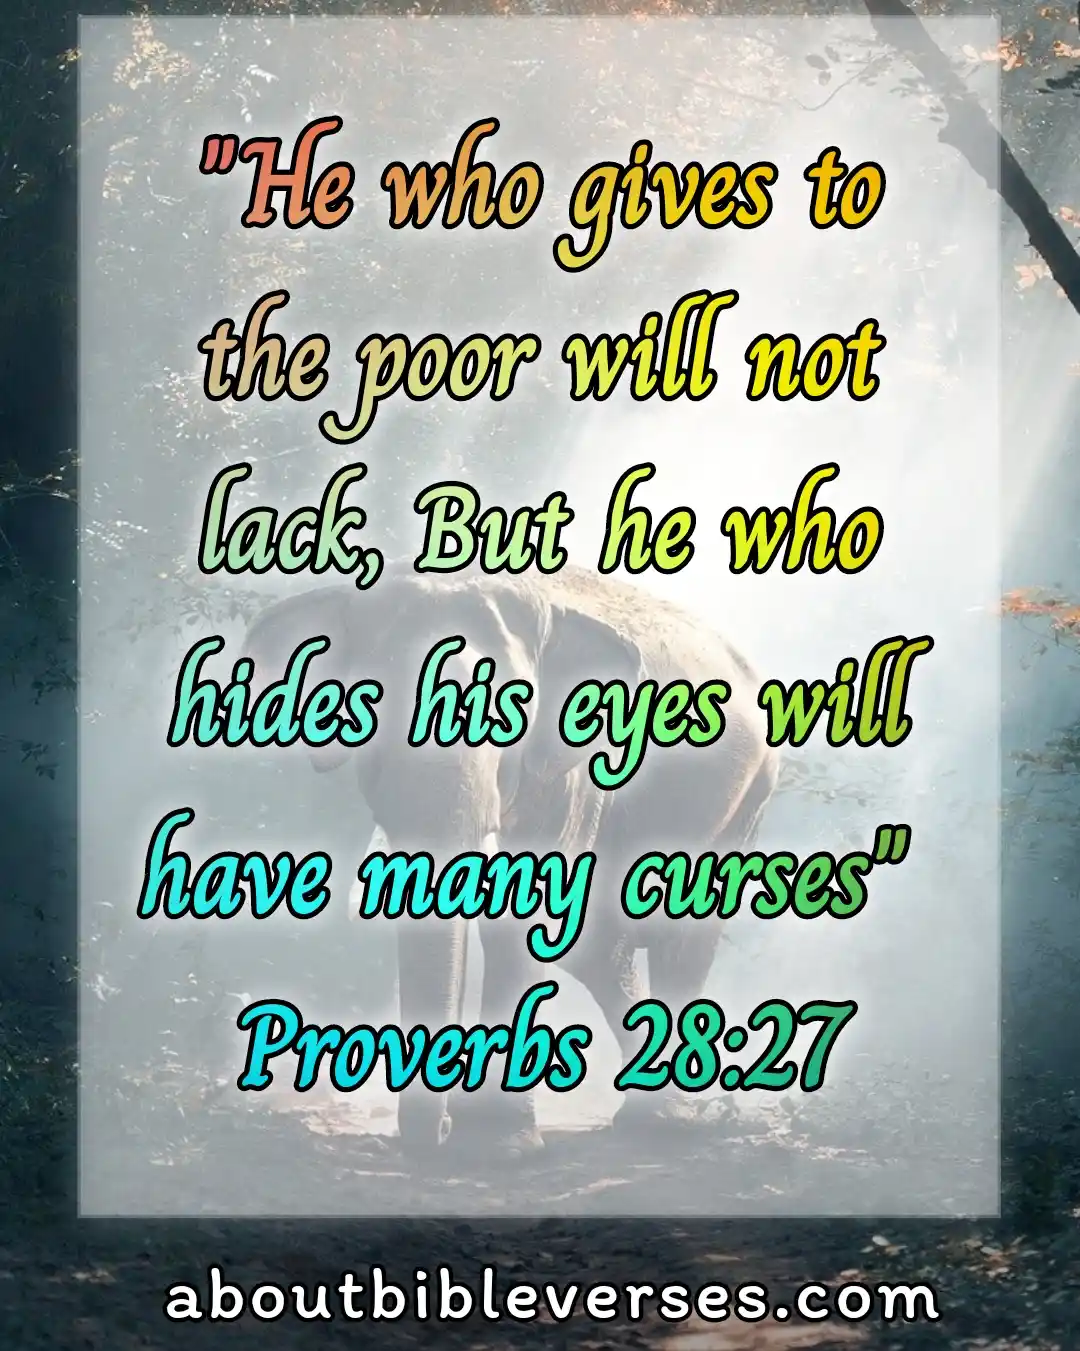 bible verses about benefits of giving alms (Proverbs 28:27)